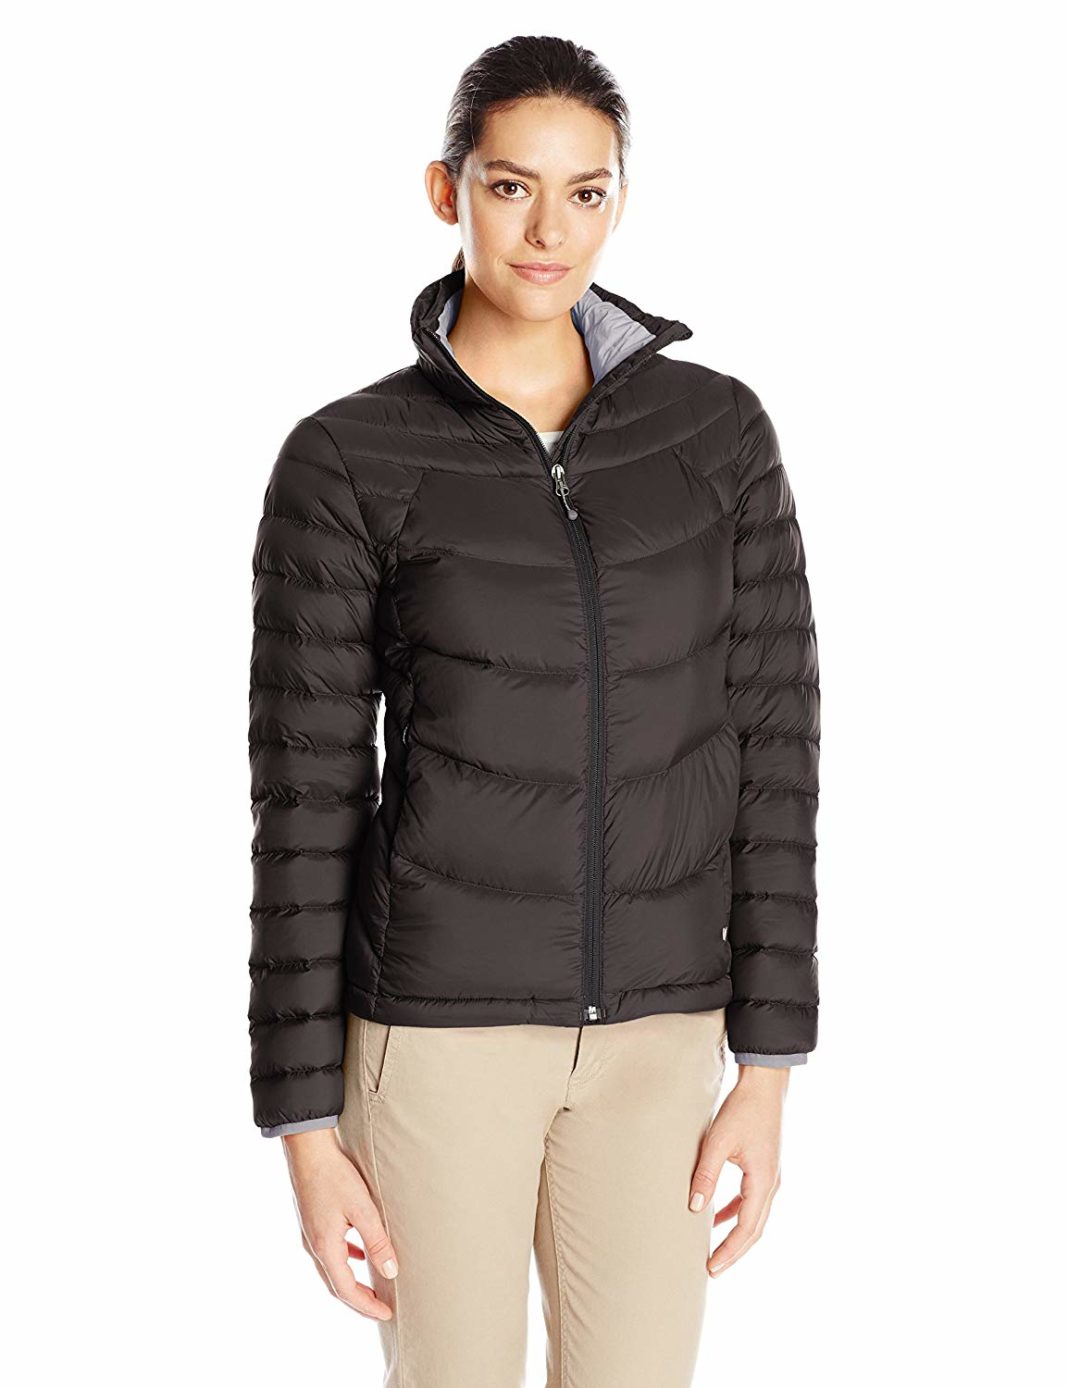 11 Best Down Jackets for Women You Need for Your Next Trip | Trekbible